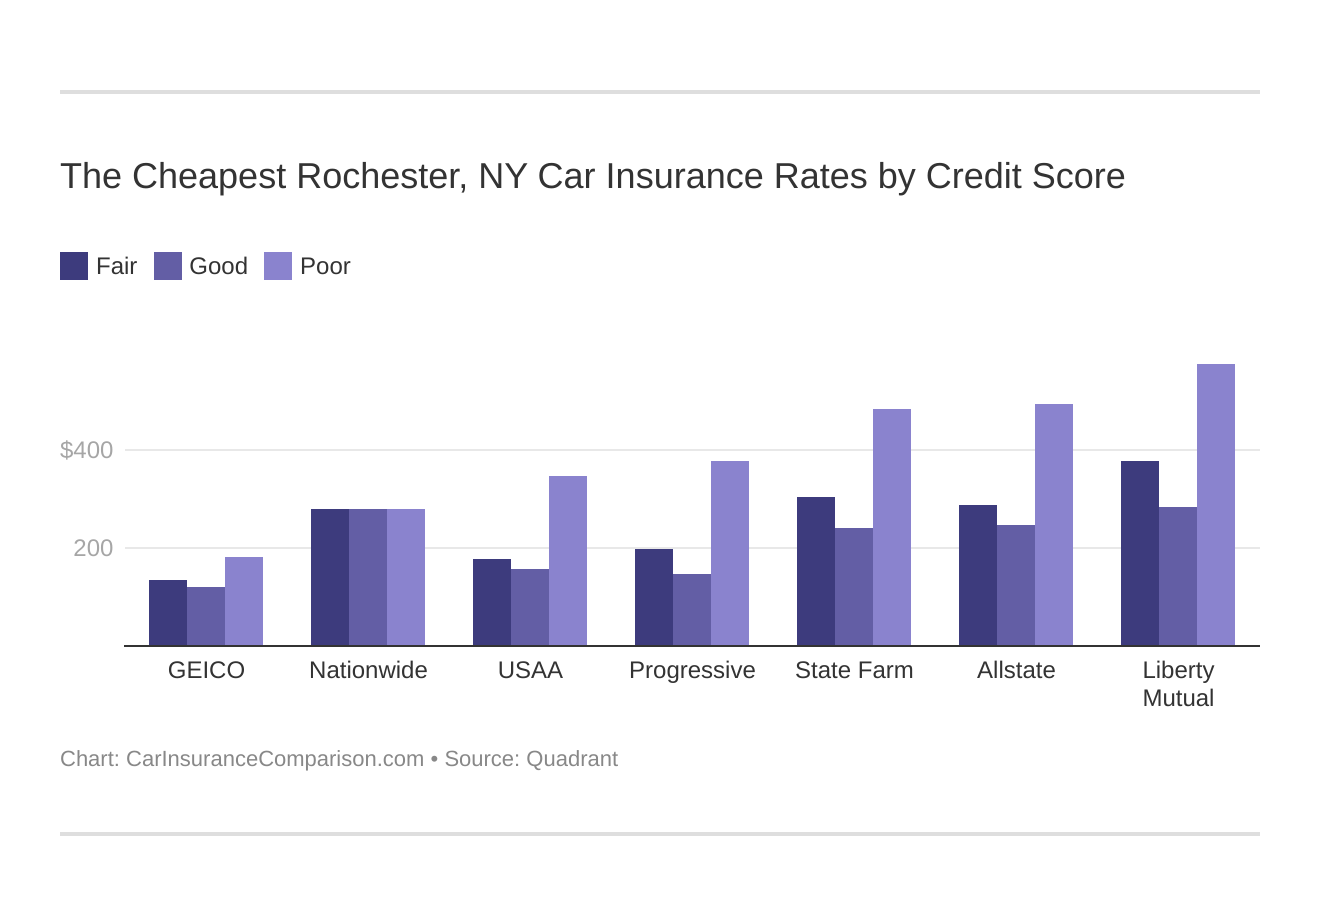 The Cheapest Rochester, NY Car Insurance Rates by Credit Score